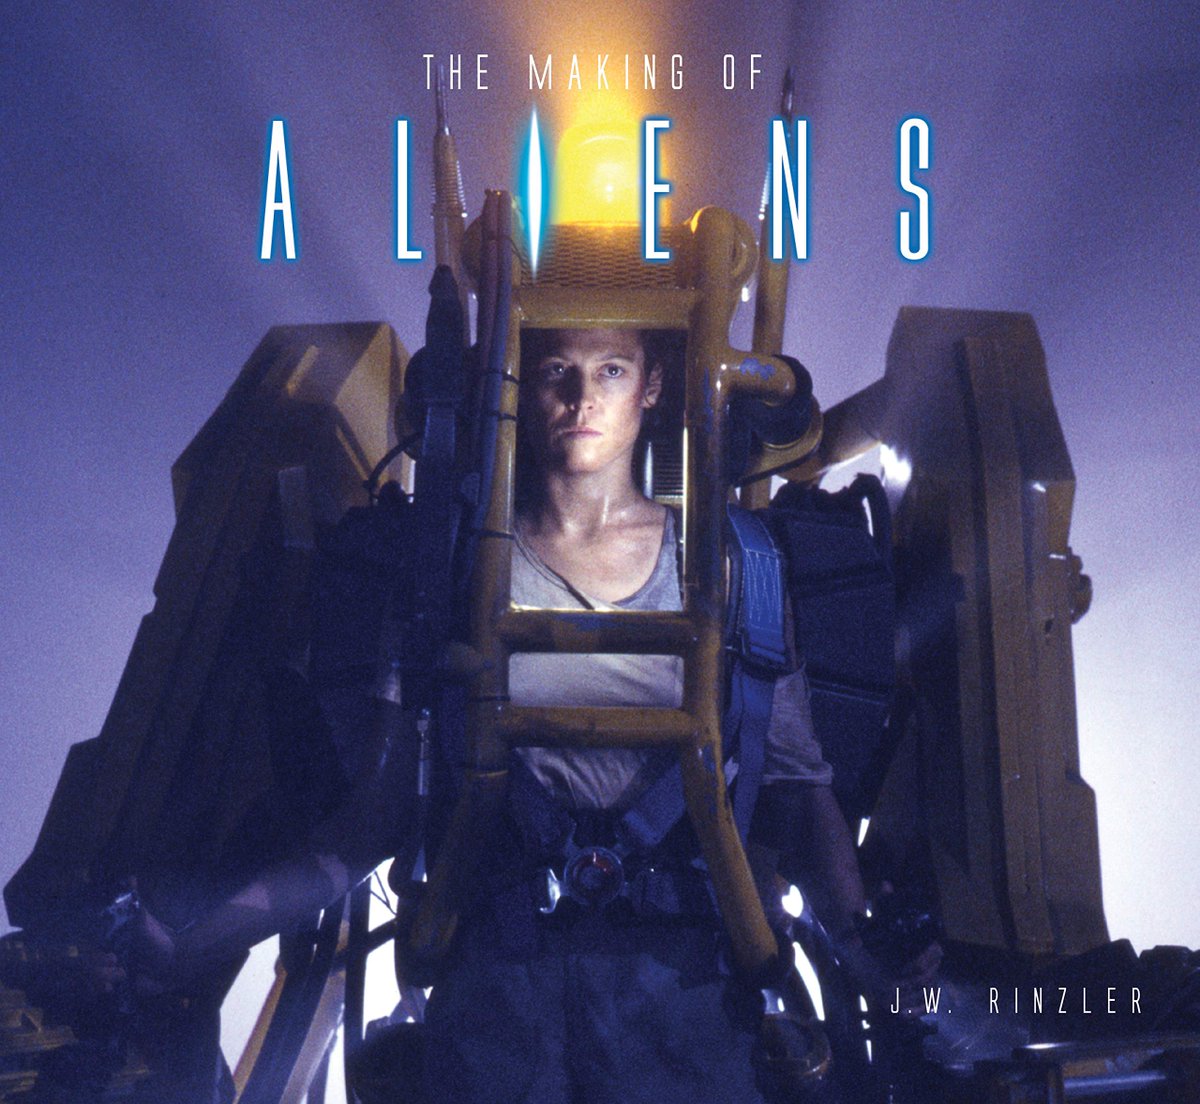 I just finished this book and it was fantastic. It read like a page turner novel. Congratulations for this great work @jwrinzler 👍
I don't know what the future ones will be, but I sure would love to read one about The Abyss.
#aliens #themakingofaliens #makingof @JimCameron